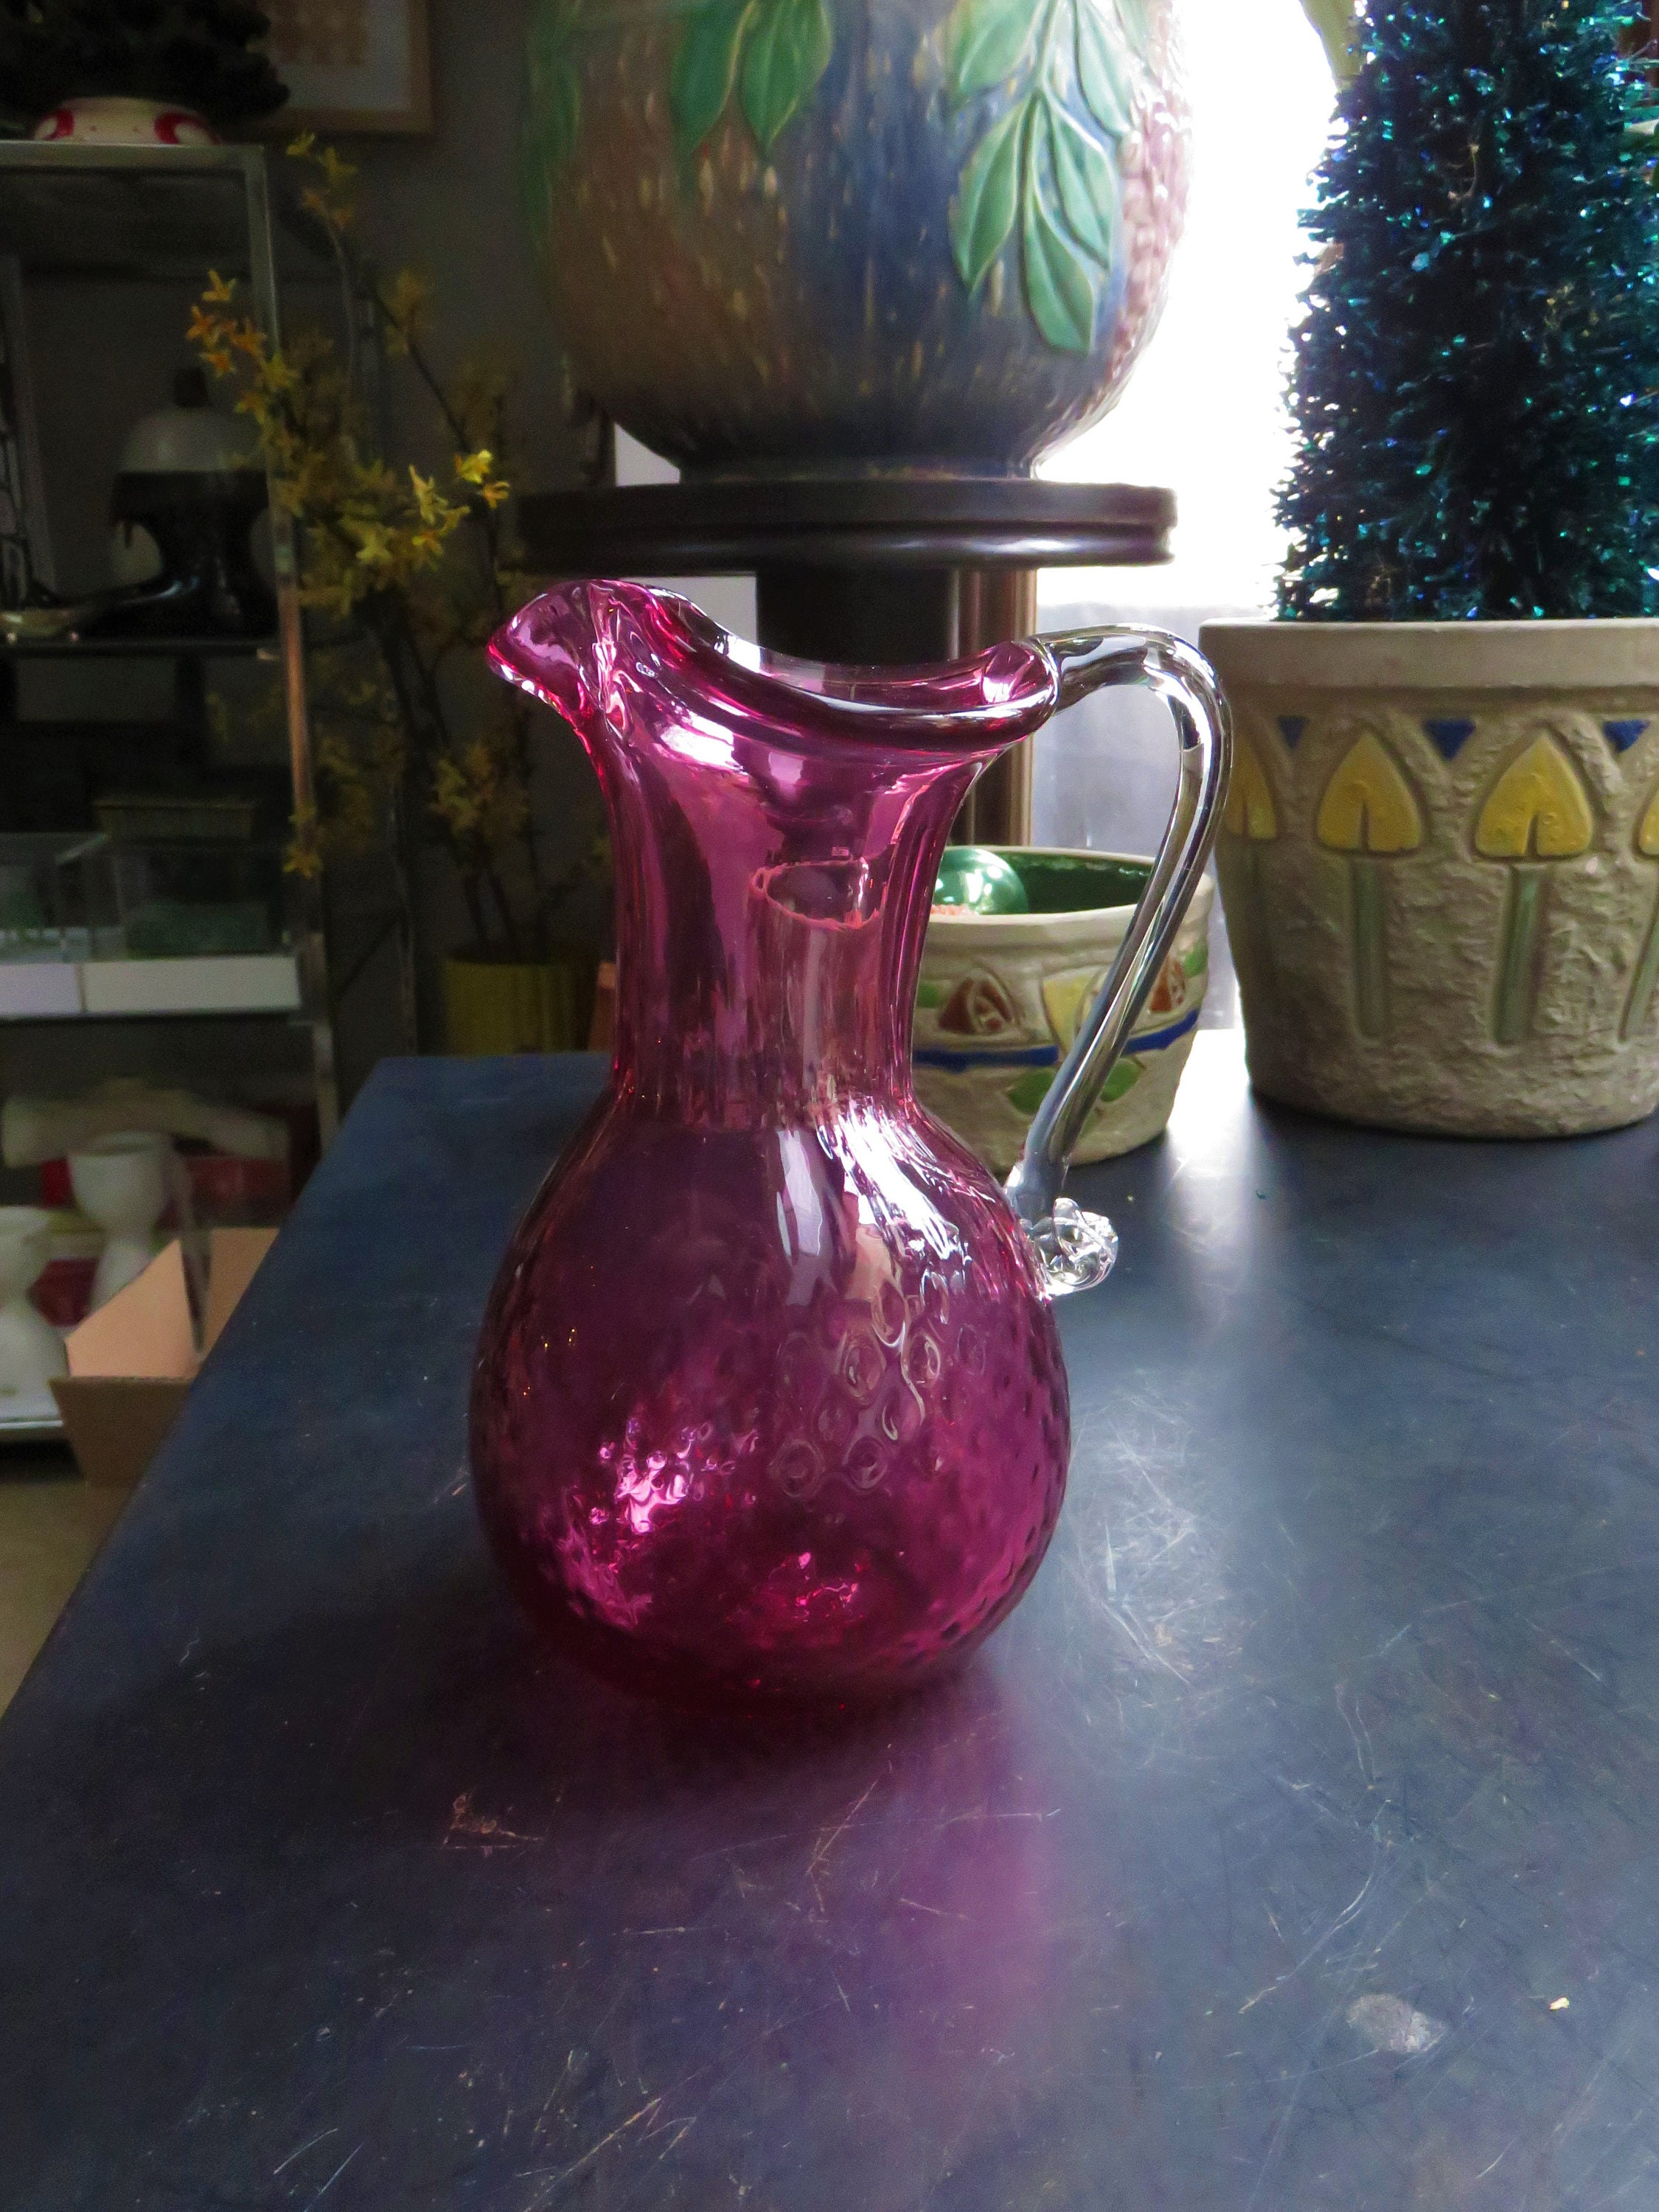 Antique Cranberry Glass Creamer or Small Pitcher with Applied Crystal -  Ruby Lane